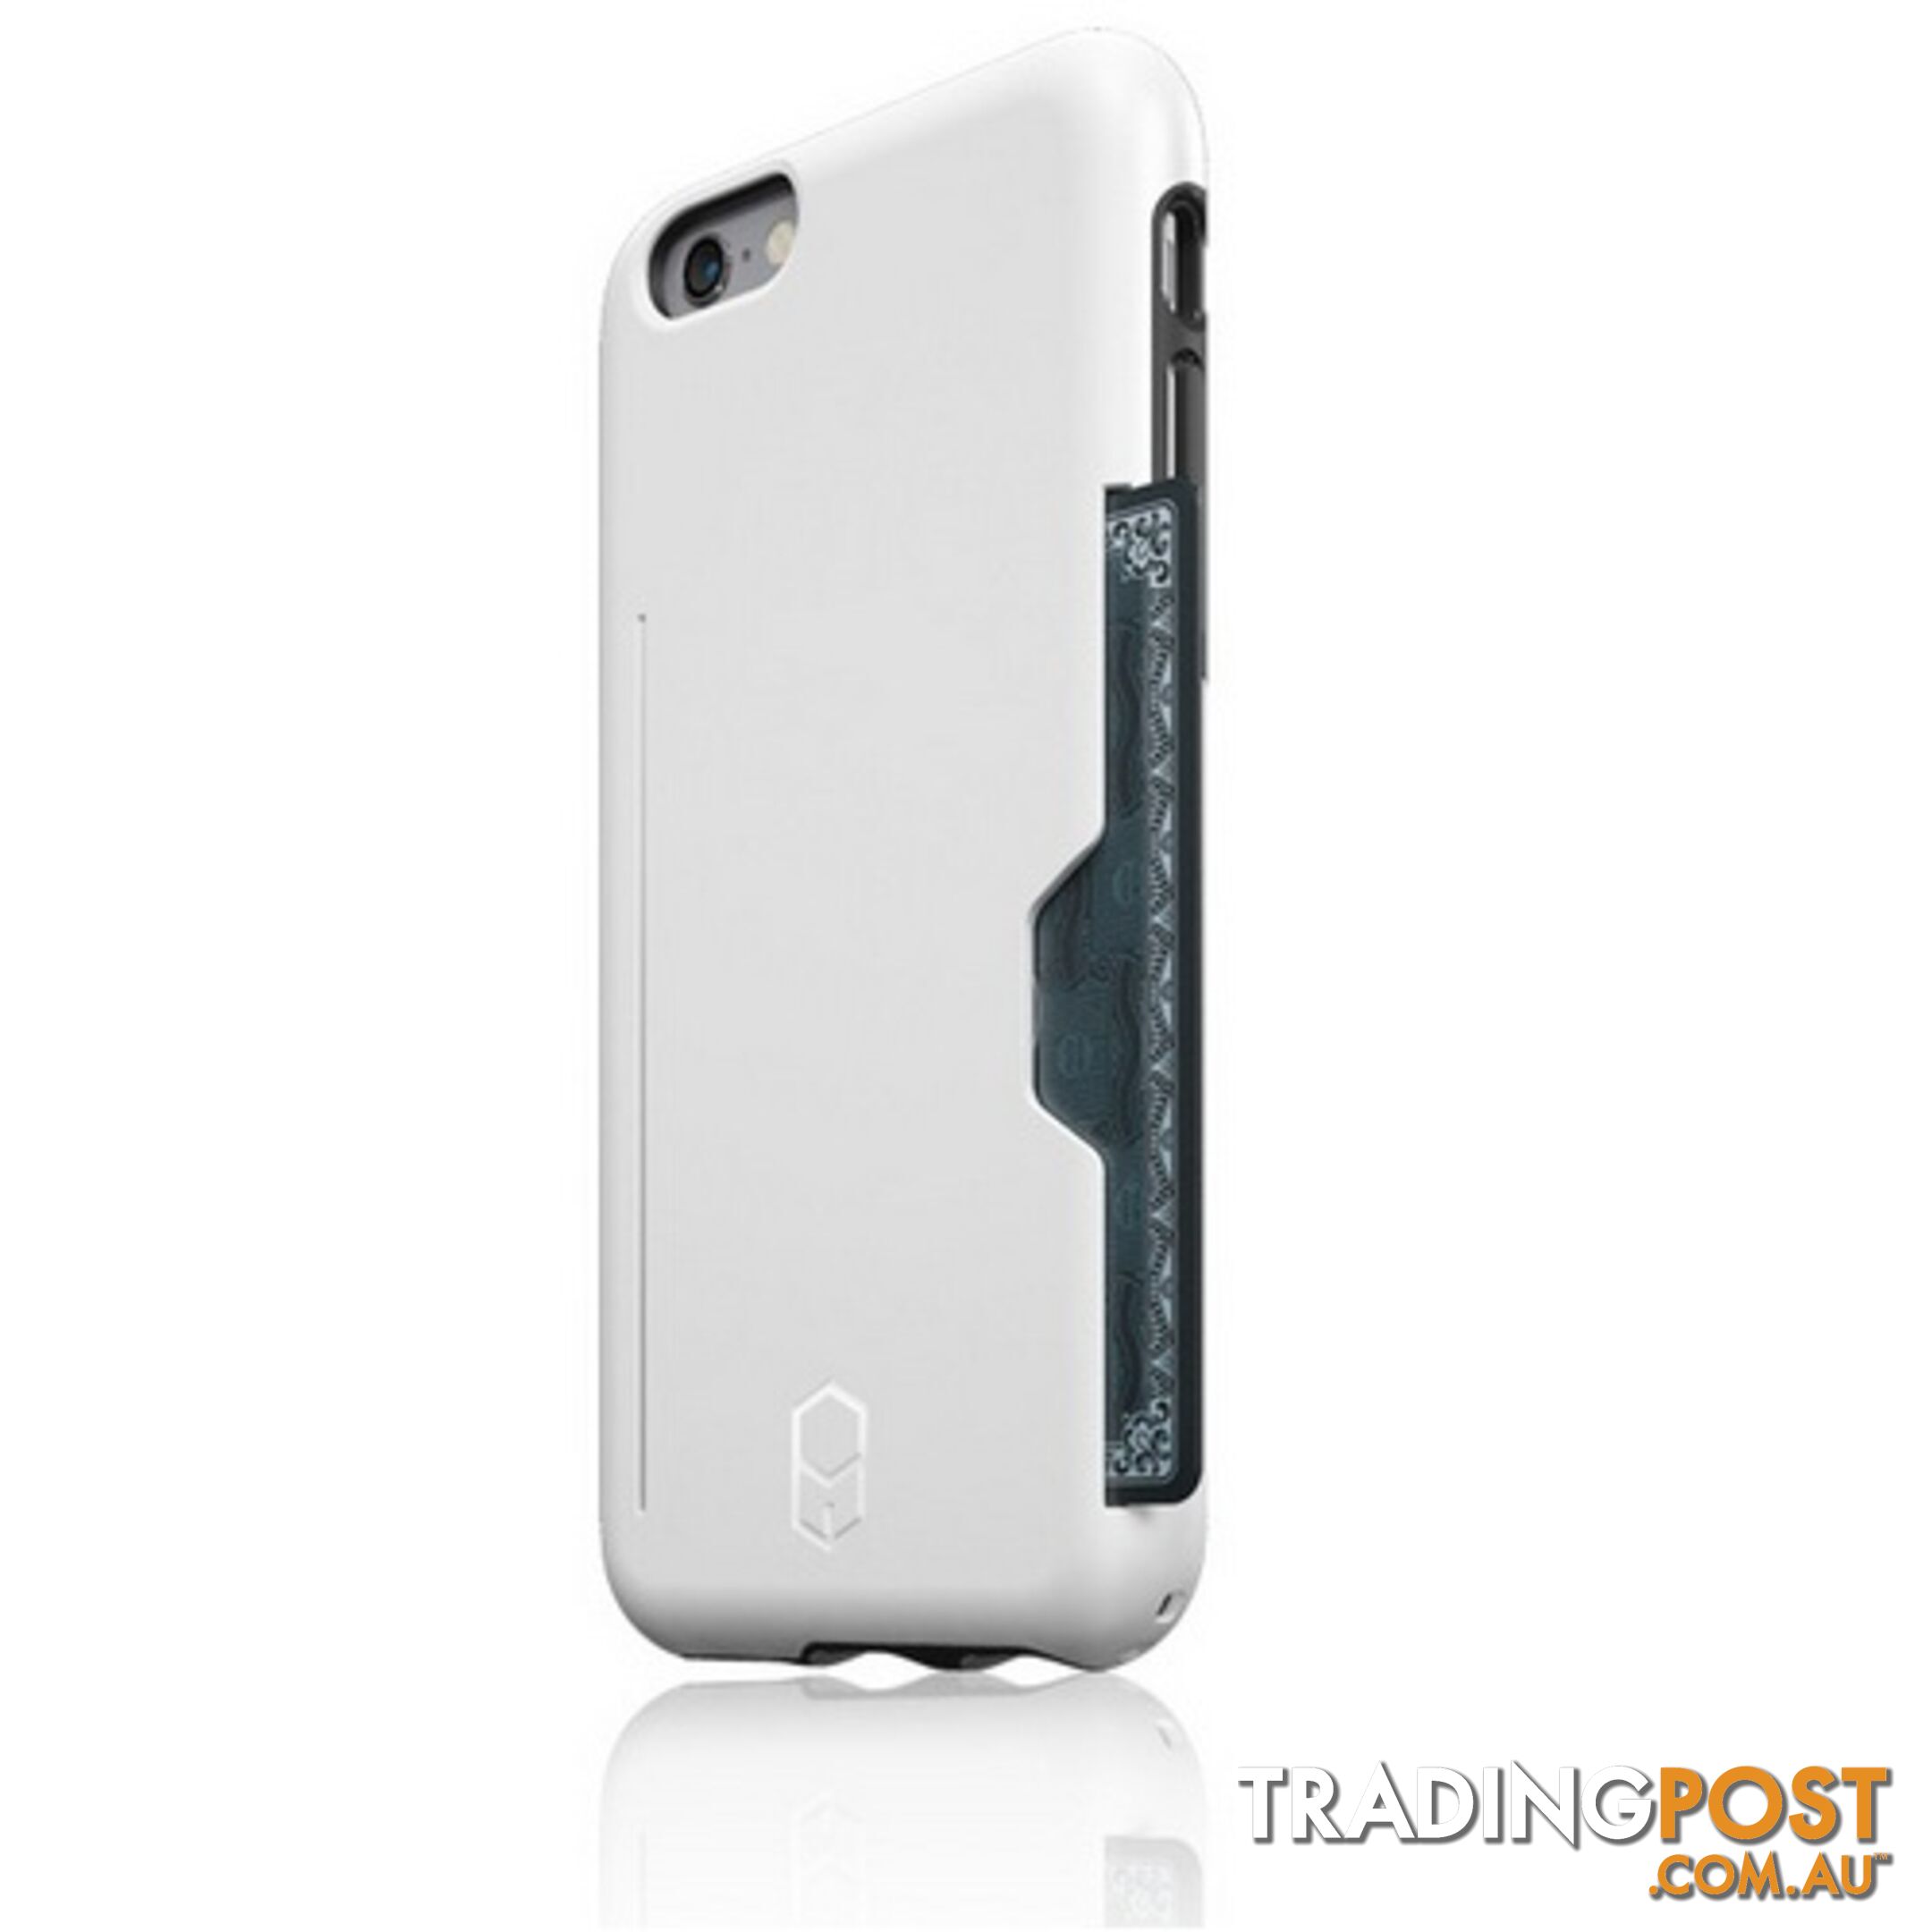 Patchworks ITG Level PRO Case for iPhone 6s Plus / 6 Plus - White - 8809453311525/ITGL307 - Patchworks